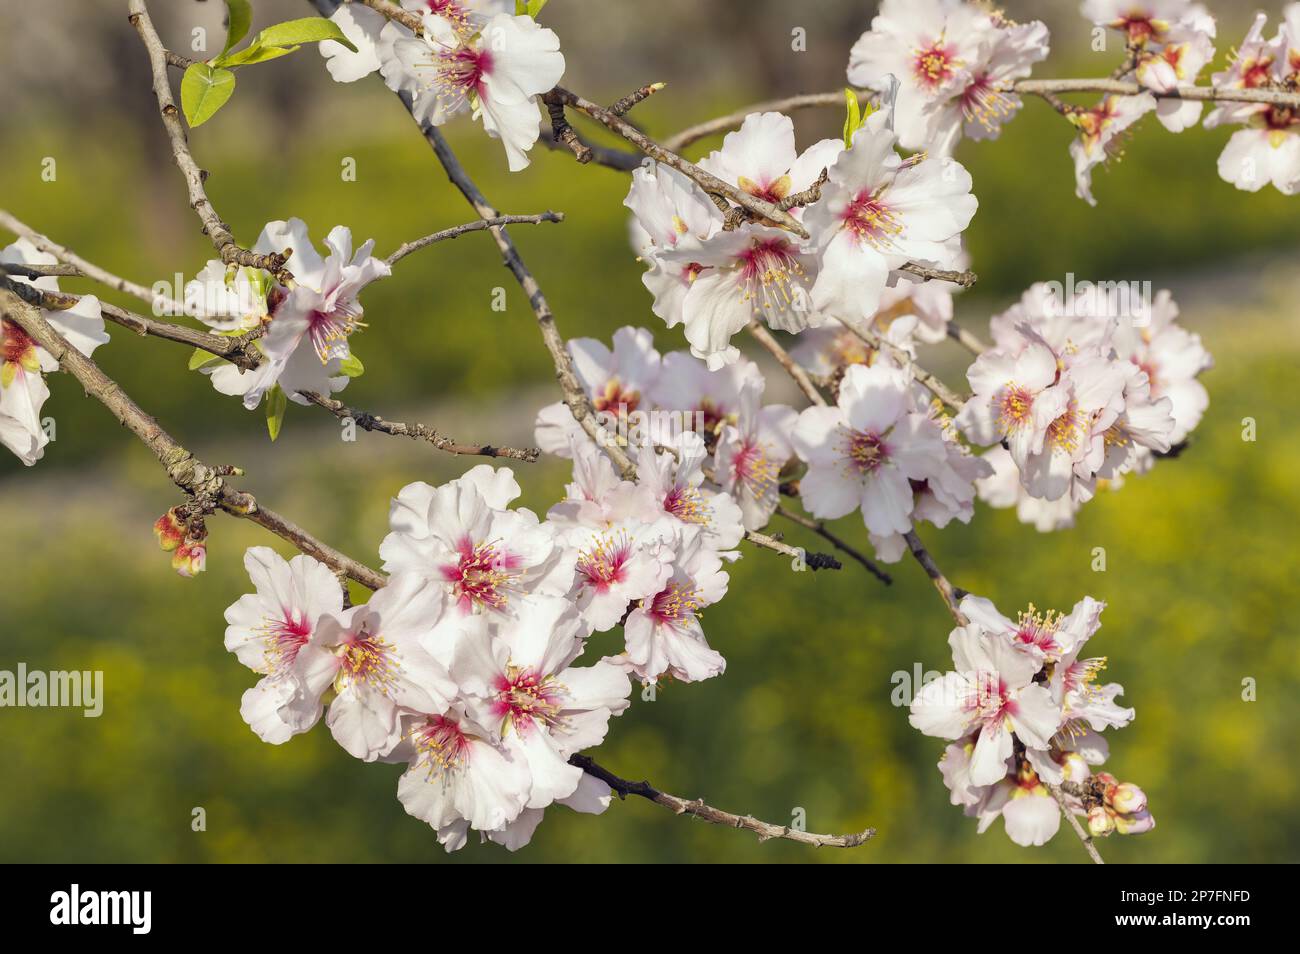 Closeup of beautiful white pink flowers of a blossoming almond tree in an almond garden orchard in Northern Israel Stock Photo